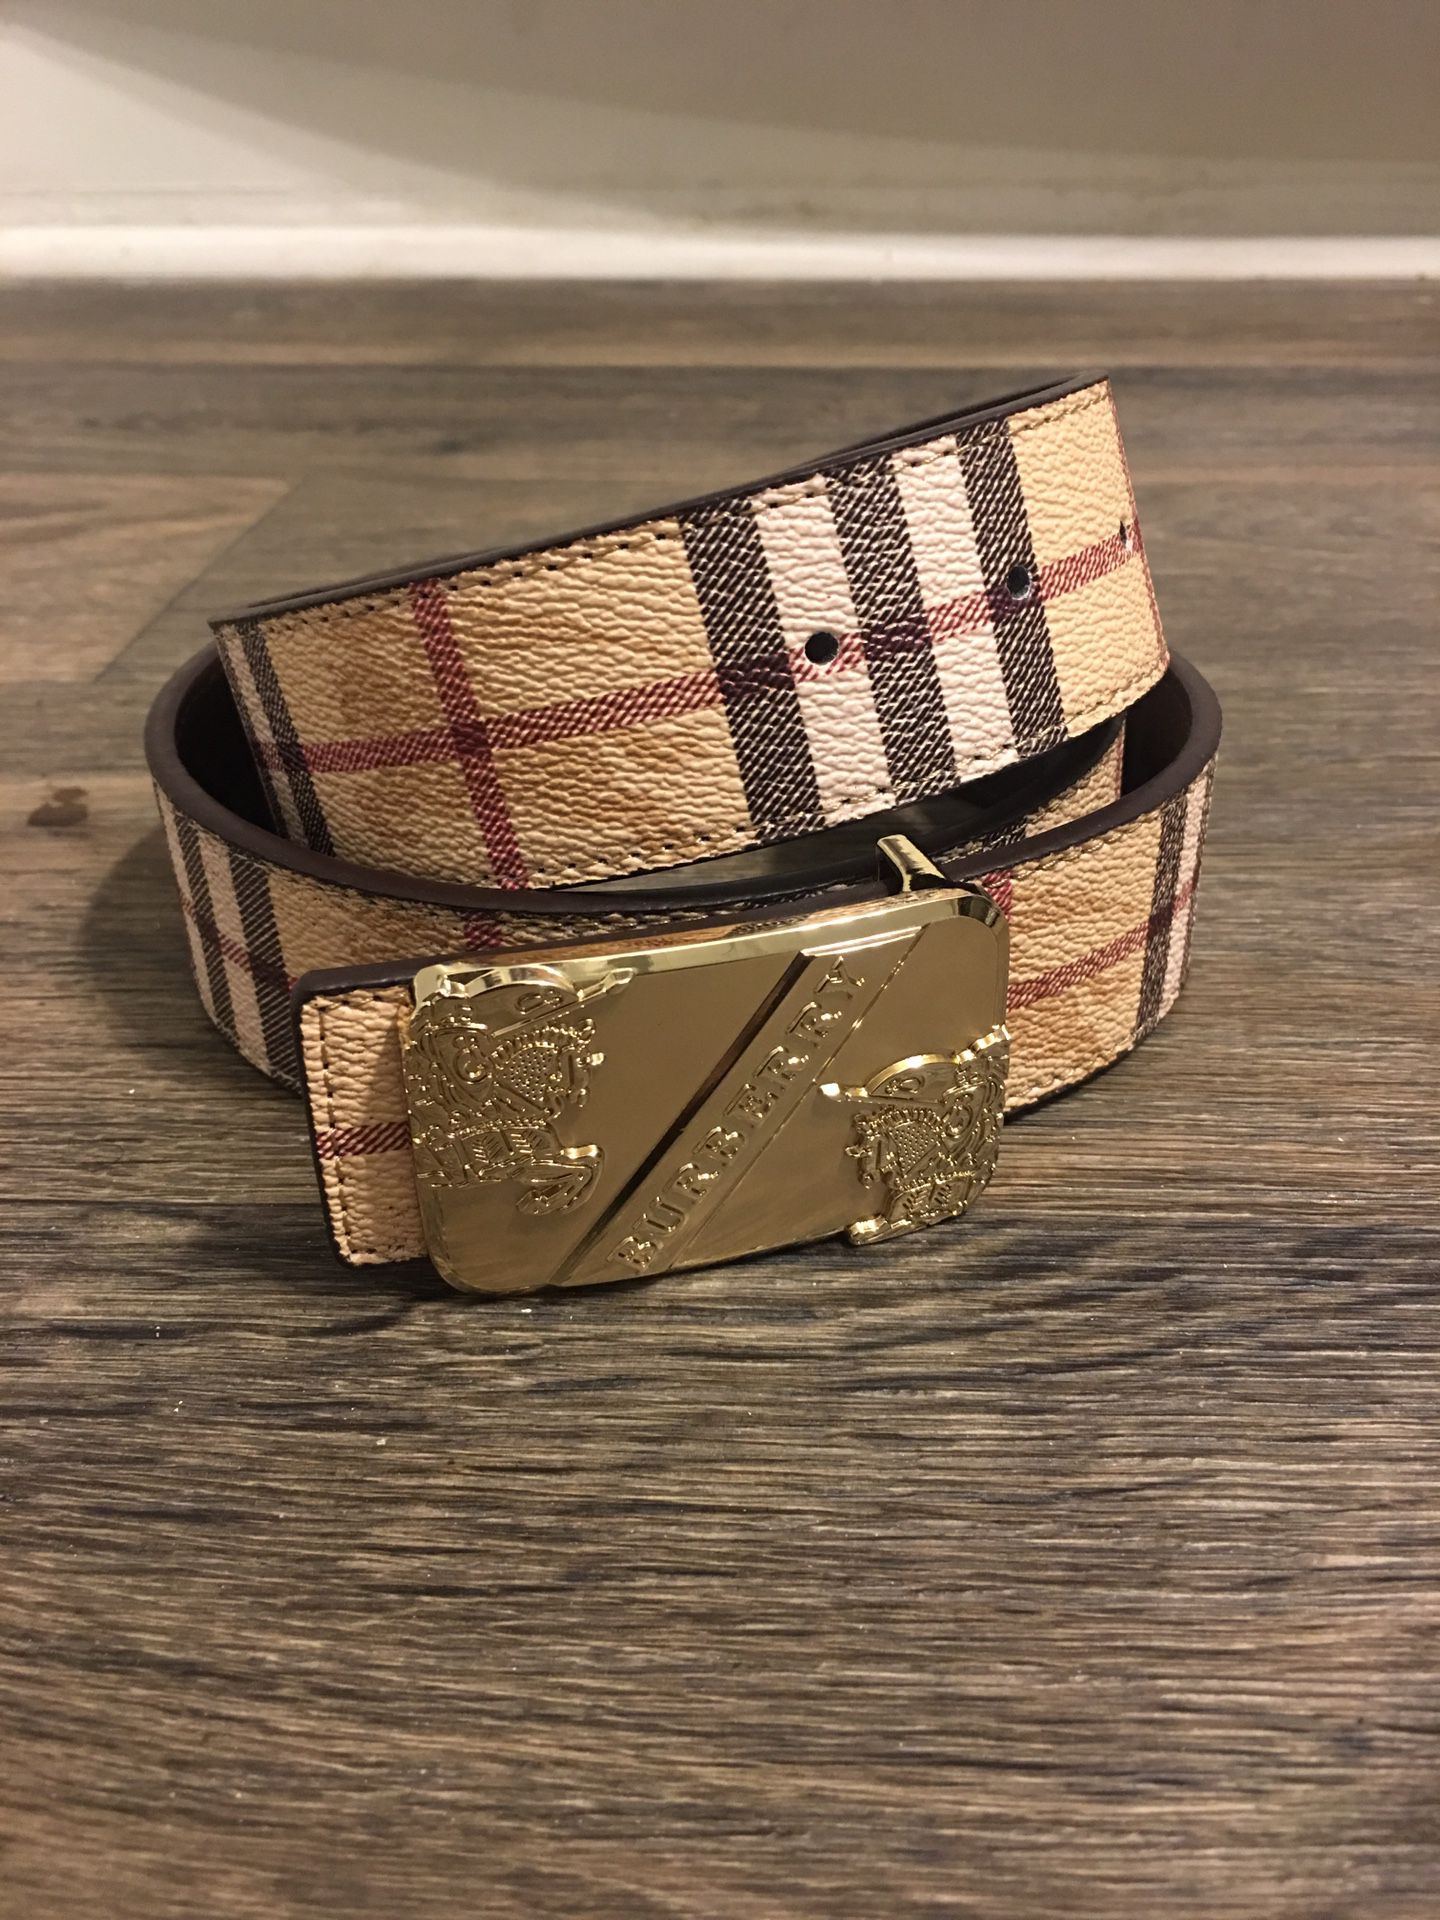 Burberry Belt for Sale in Huntington Beach, CA - OfferUp